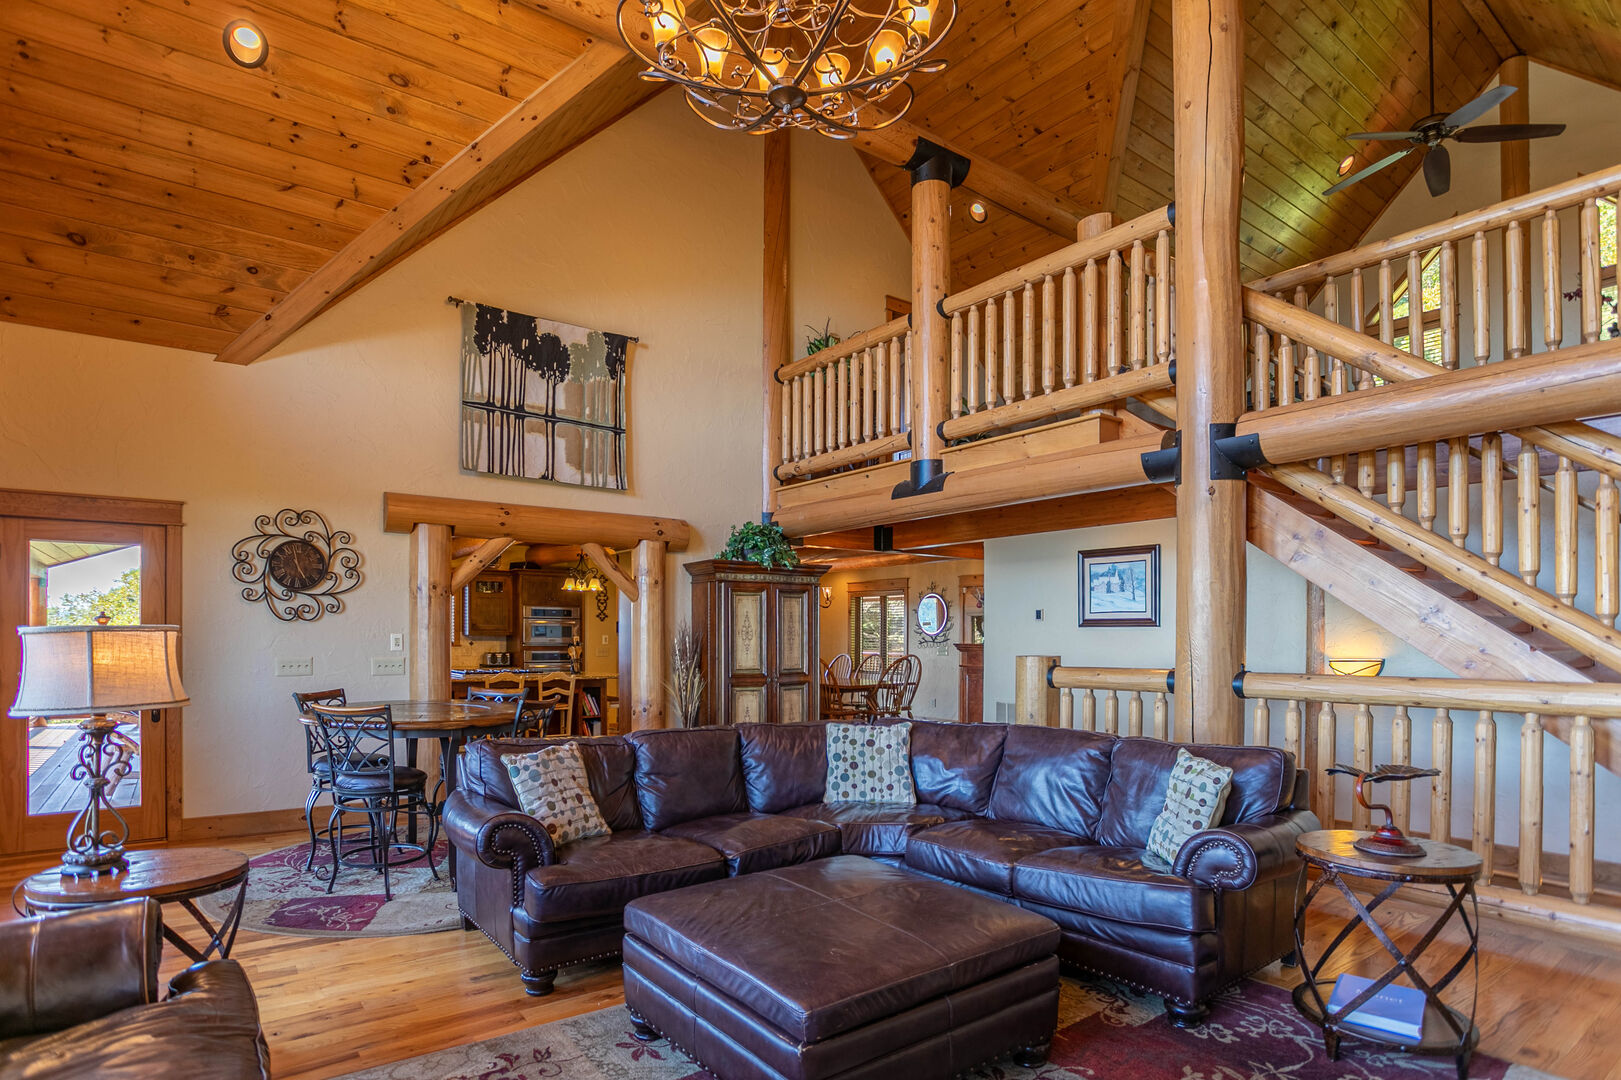 Property Info - The Best Boone NC Cabin Rentals and ...